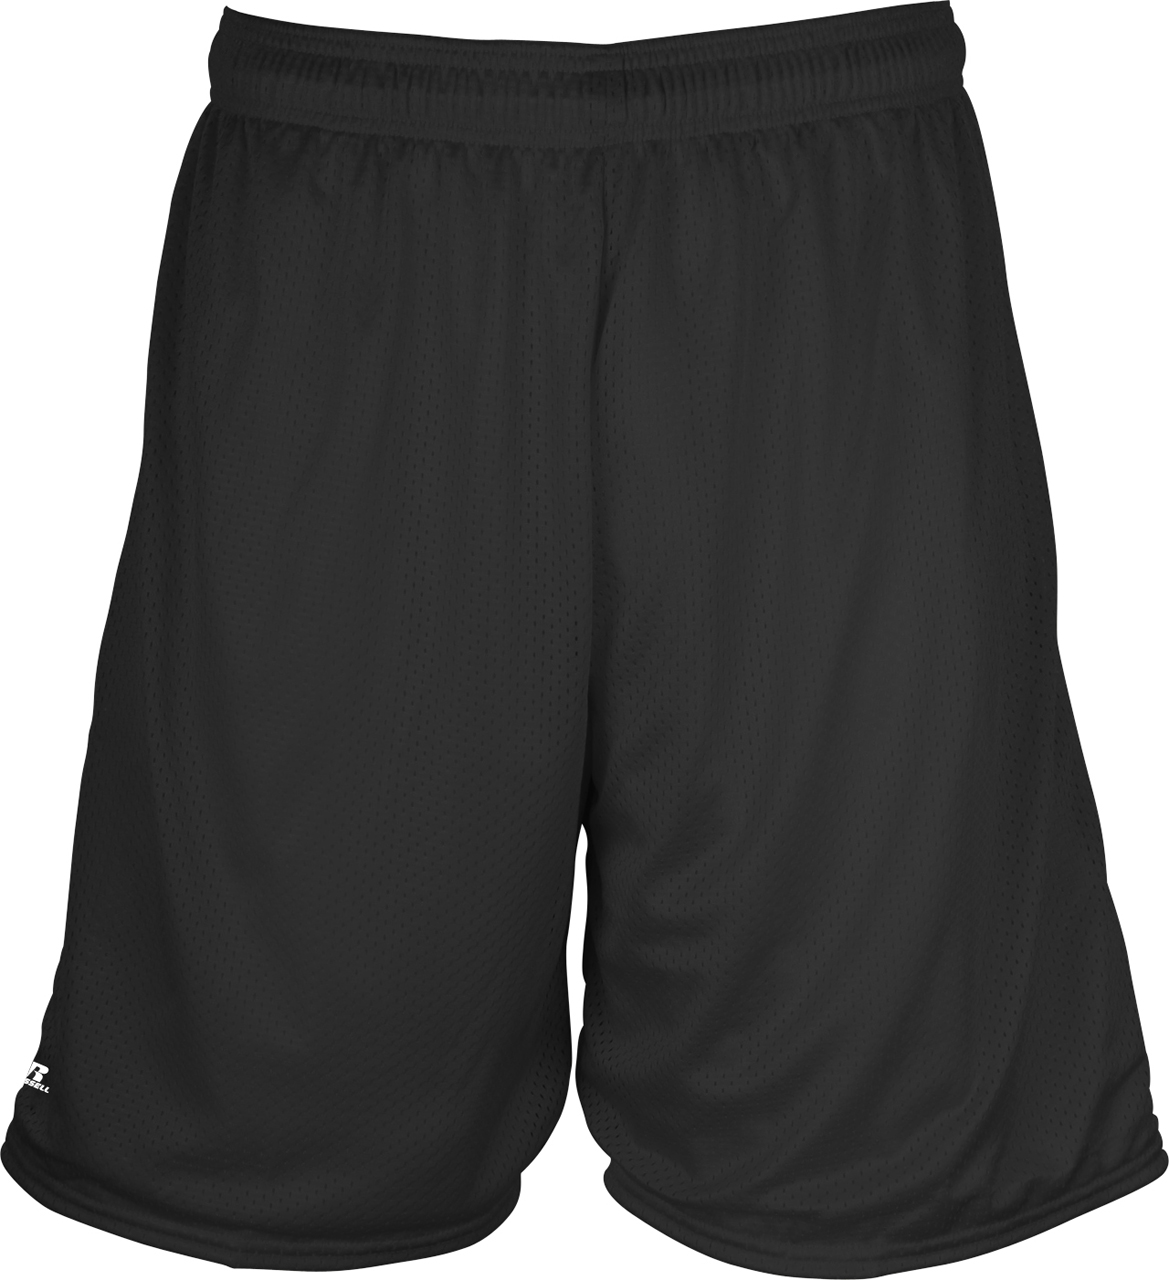 Picture of Russell Adult Tricot Mesh Short